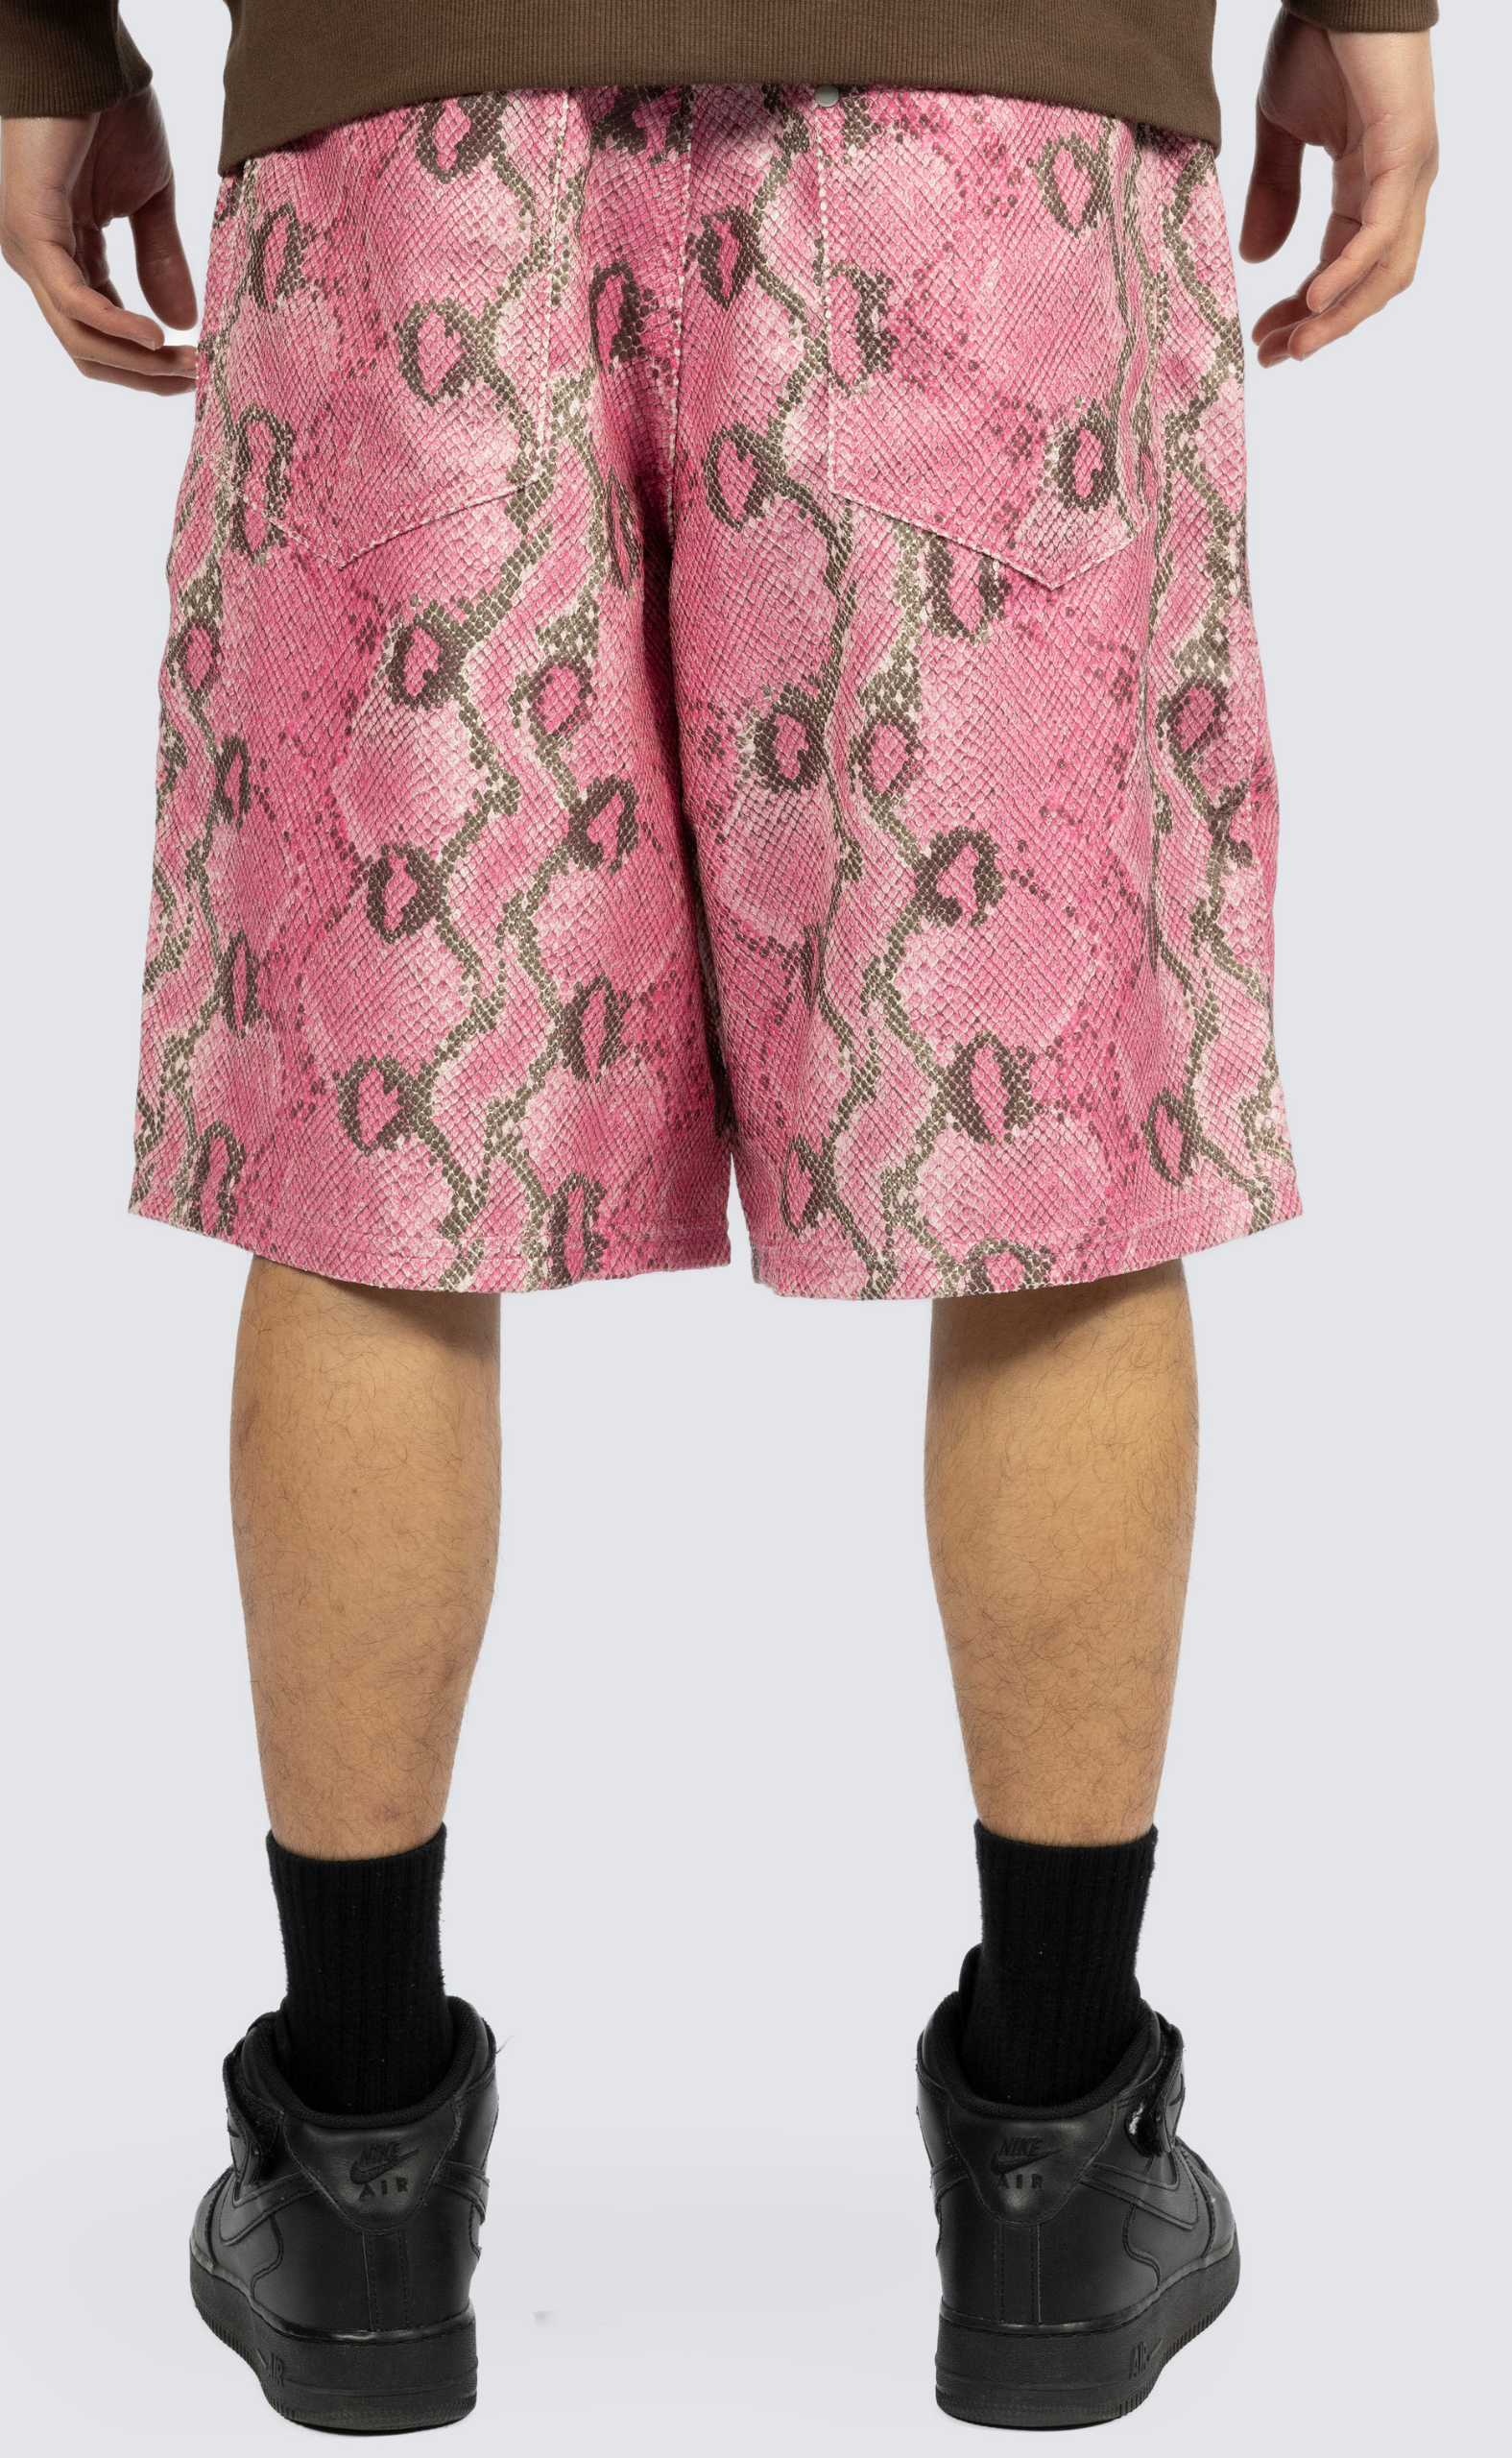 RATTLE PINK SHORTS